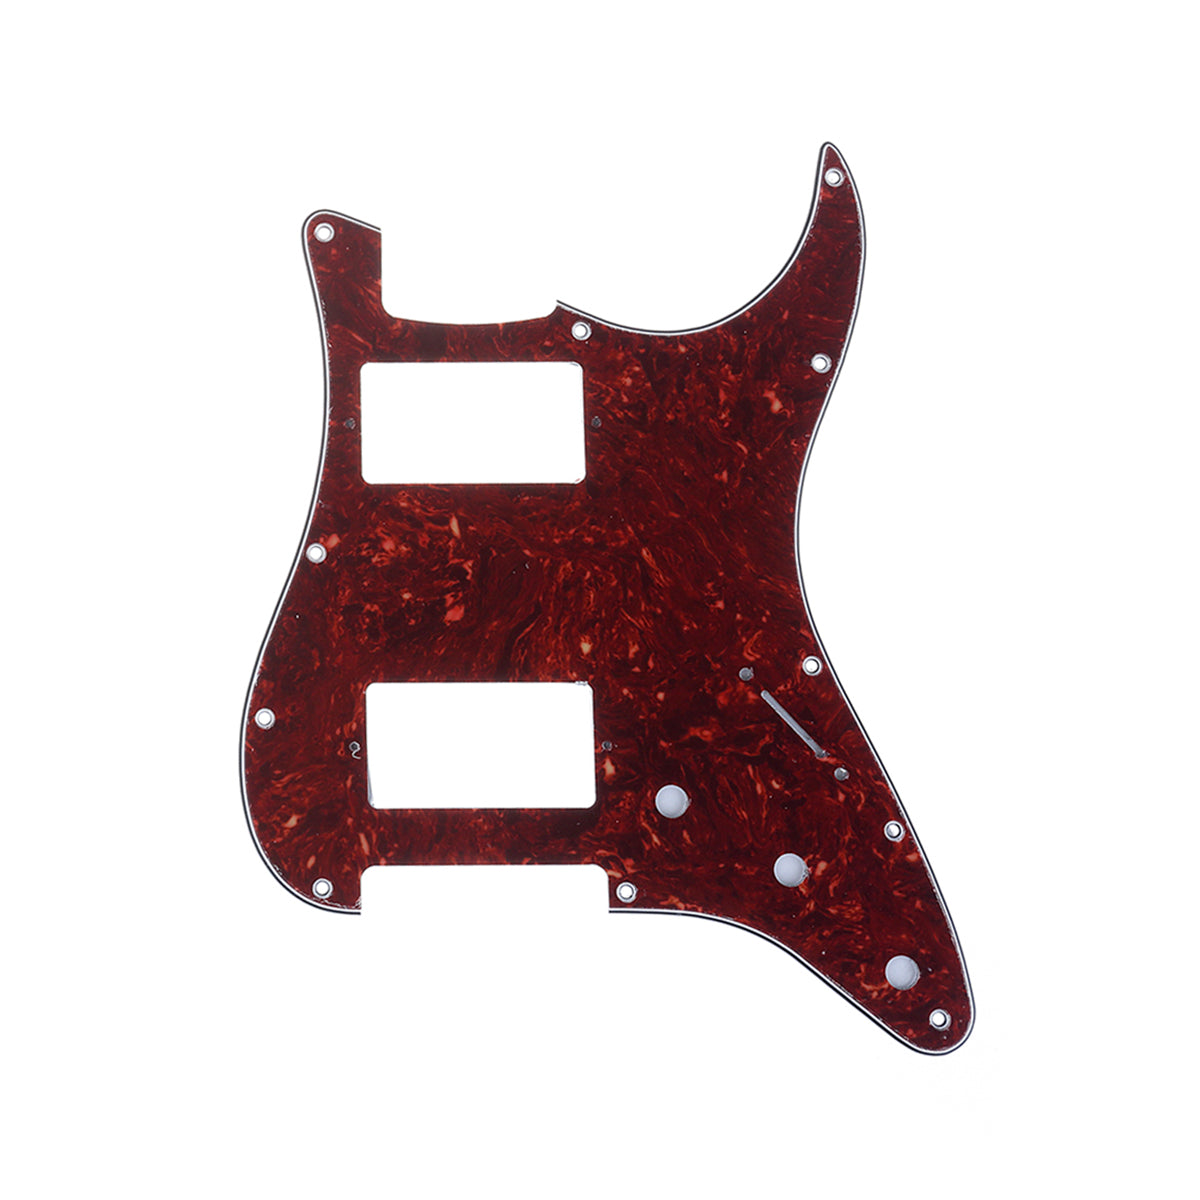 Musiclily Pro 11 Hole Guitar Strat Pickguard HH for American/Mexican Fender Standard Stratocaster Modern Style, 4Ply Vintage Tortoise